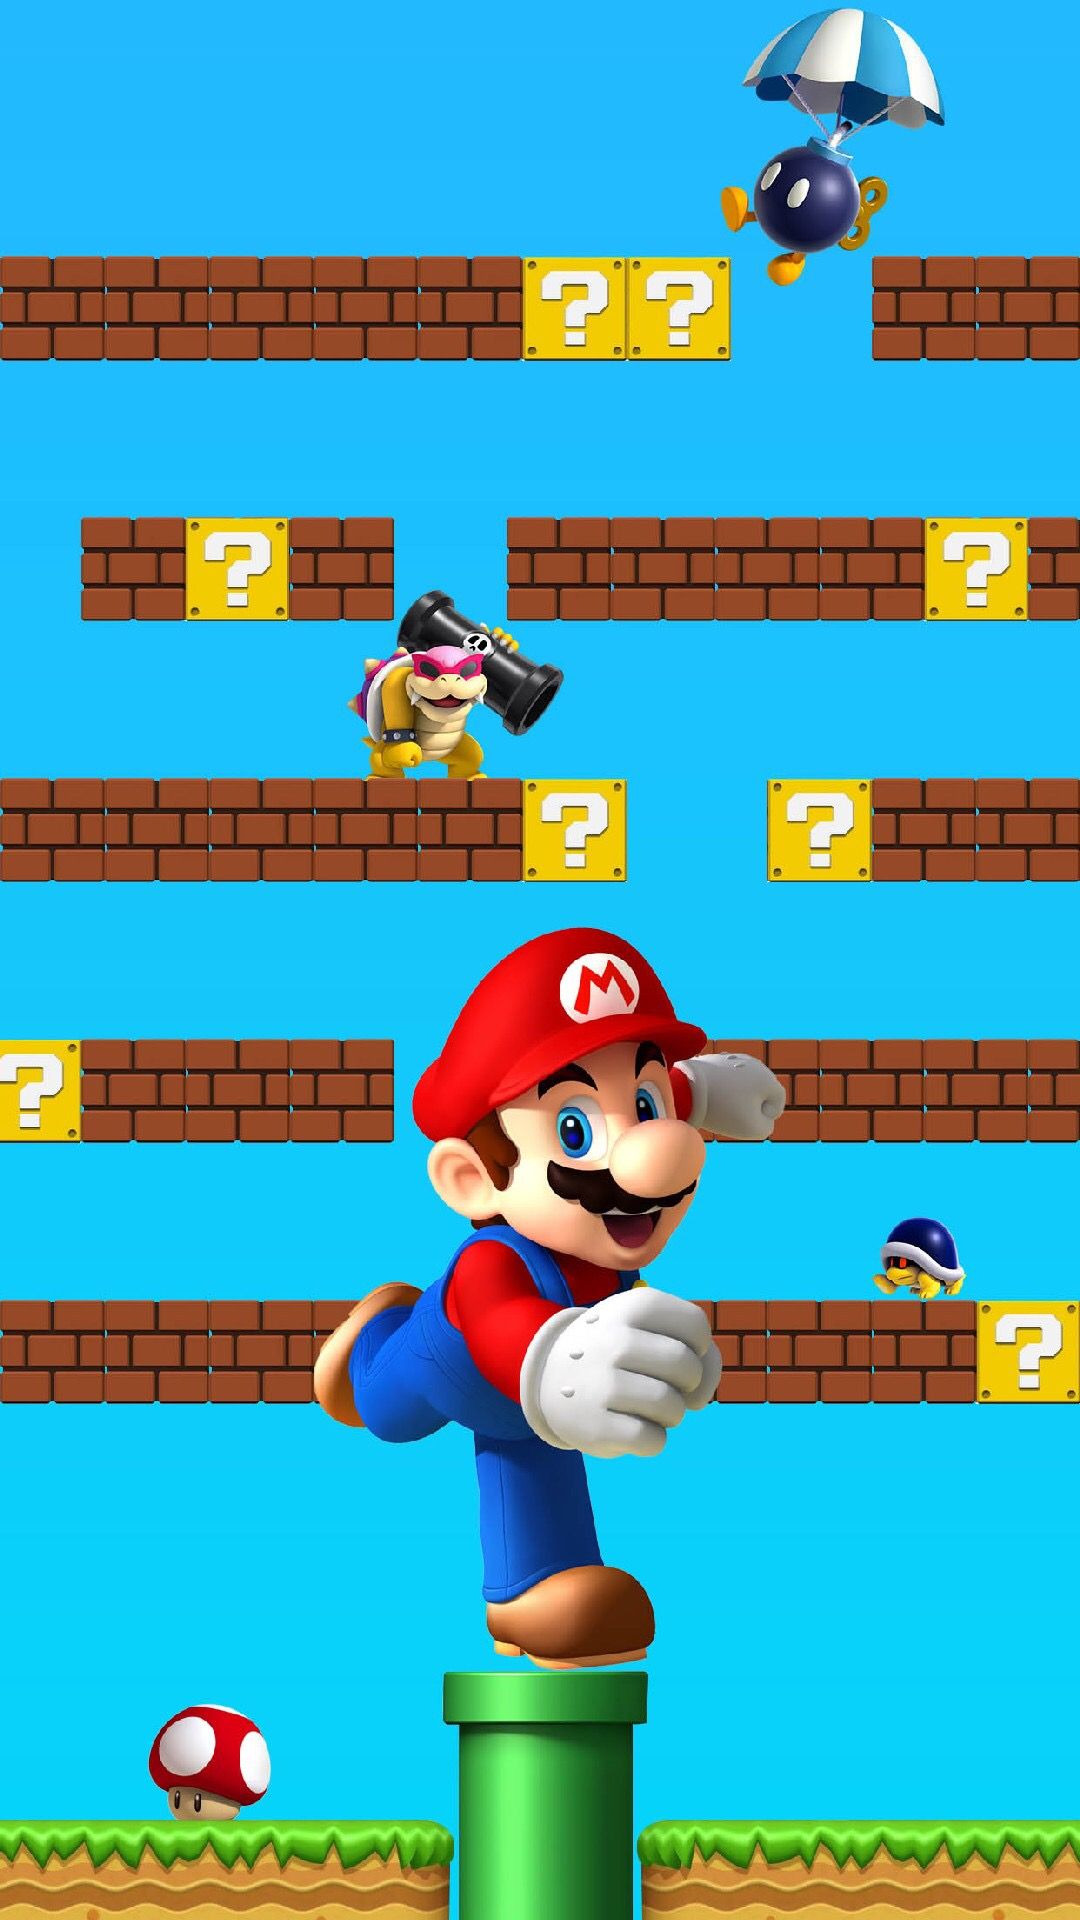 Super Mario Characters Wallpapers